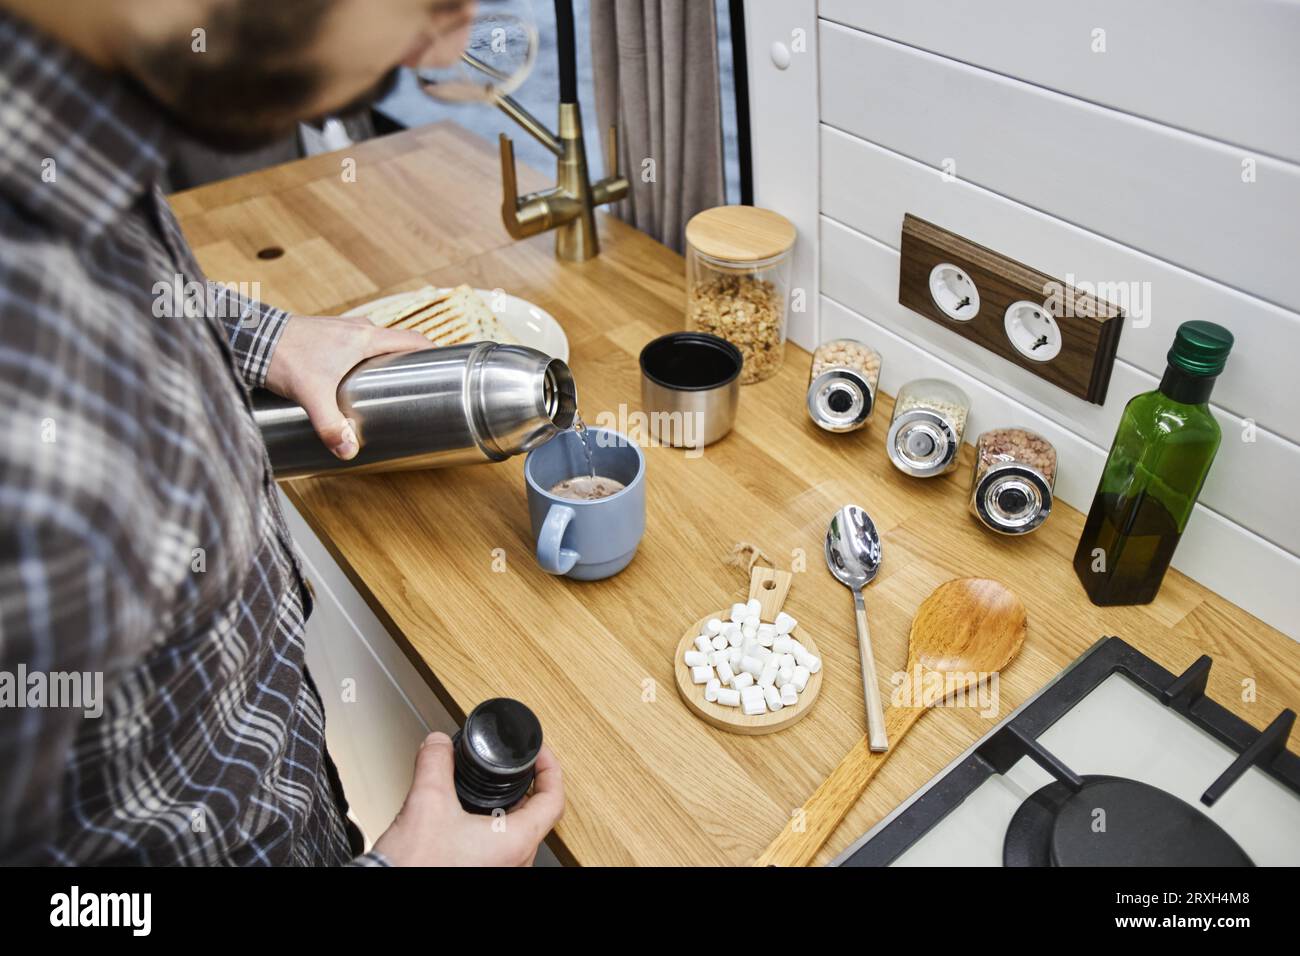 Making Tasty Coffee in the Home Kitchen. Coffee Maker and Accessories  Needed To Prepare it Stock Image - Image of cooking, espresso: 159871397